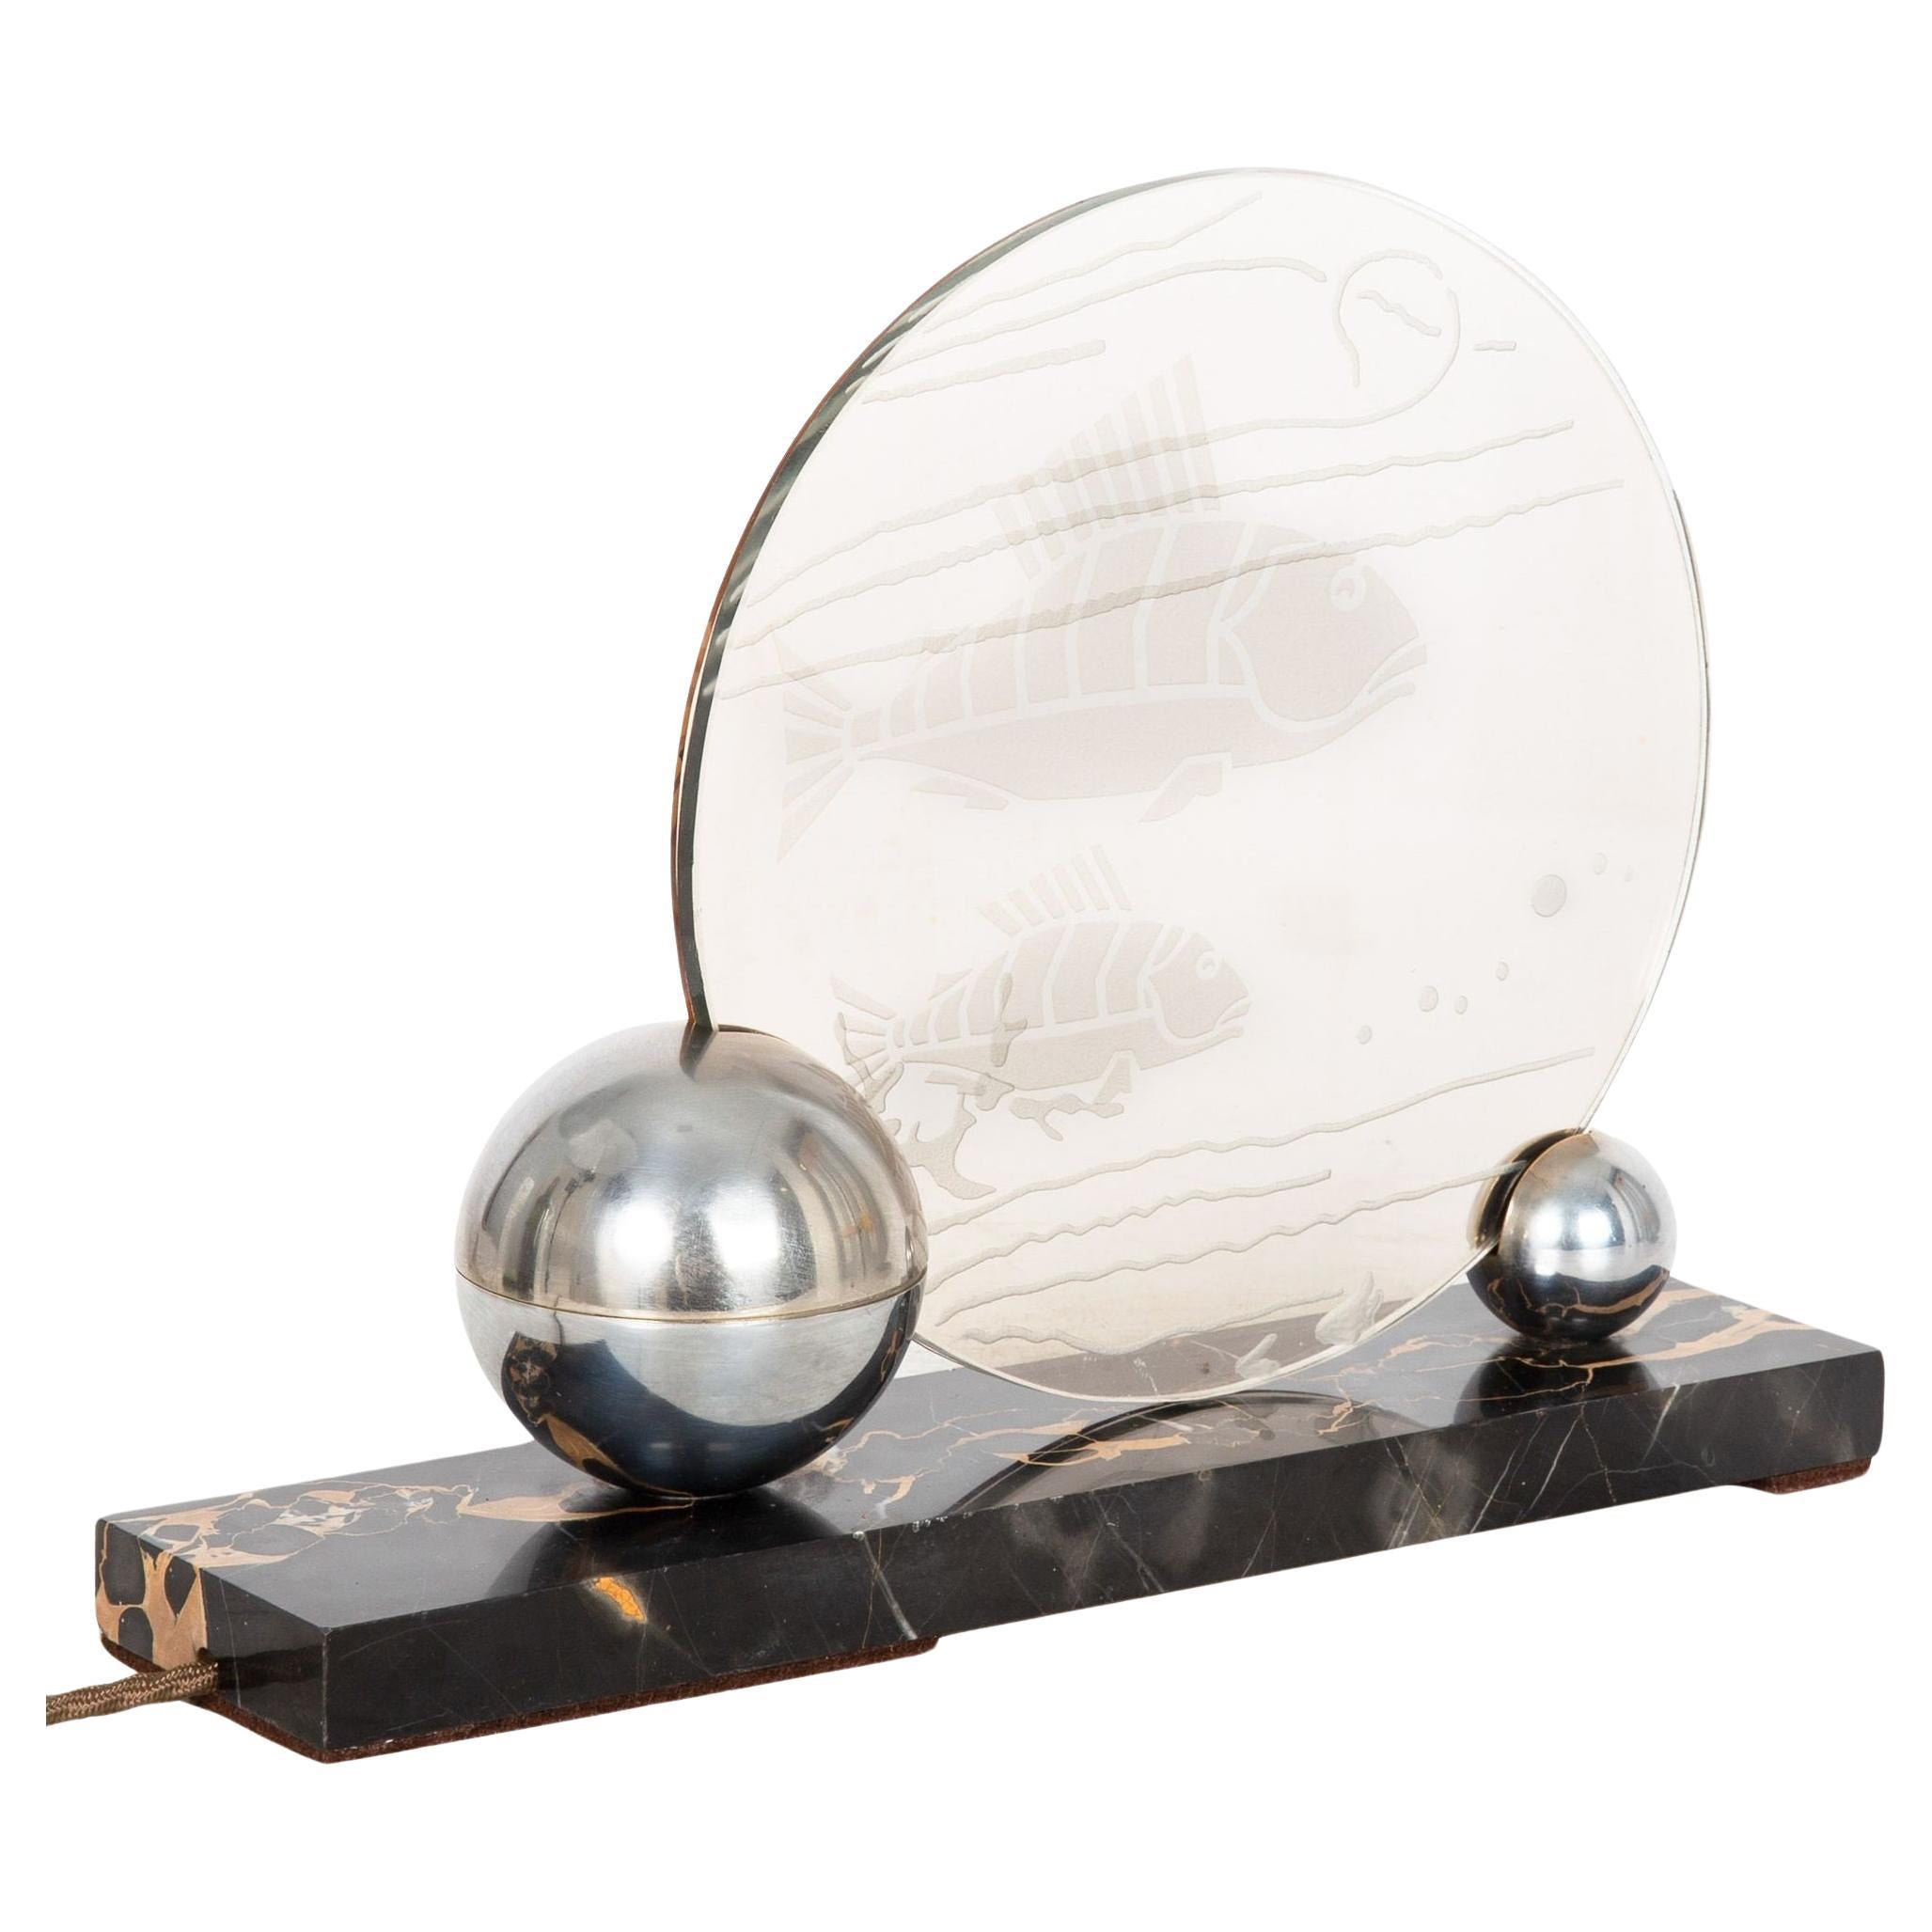 Art Deco Chrome, Marble, Glass “Fish” Lumiere Table Light Lamp ca. 1930s For Sale